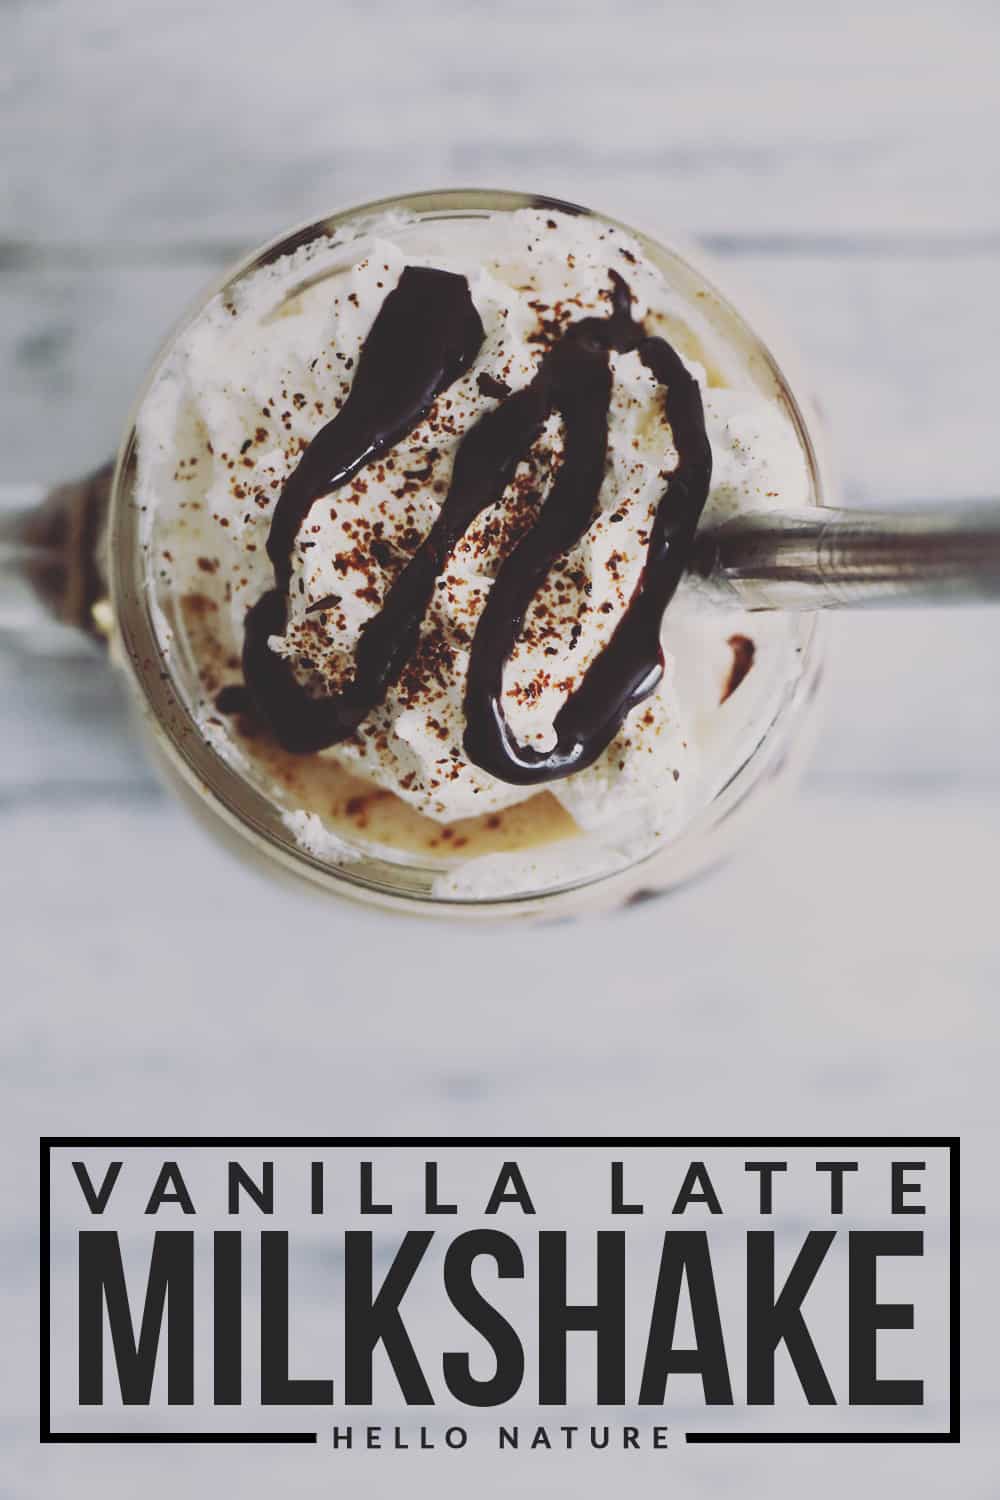 This Vanilla Latte Milkshake recipe is the perfect way to enjoy some of your favorite flavors of breakfast and dessert in one drink! 